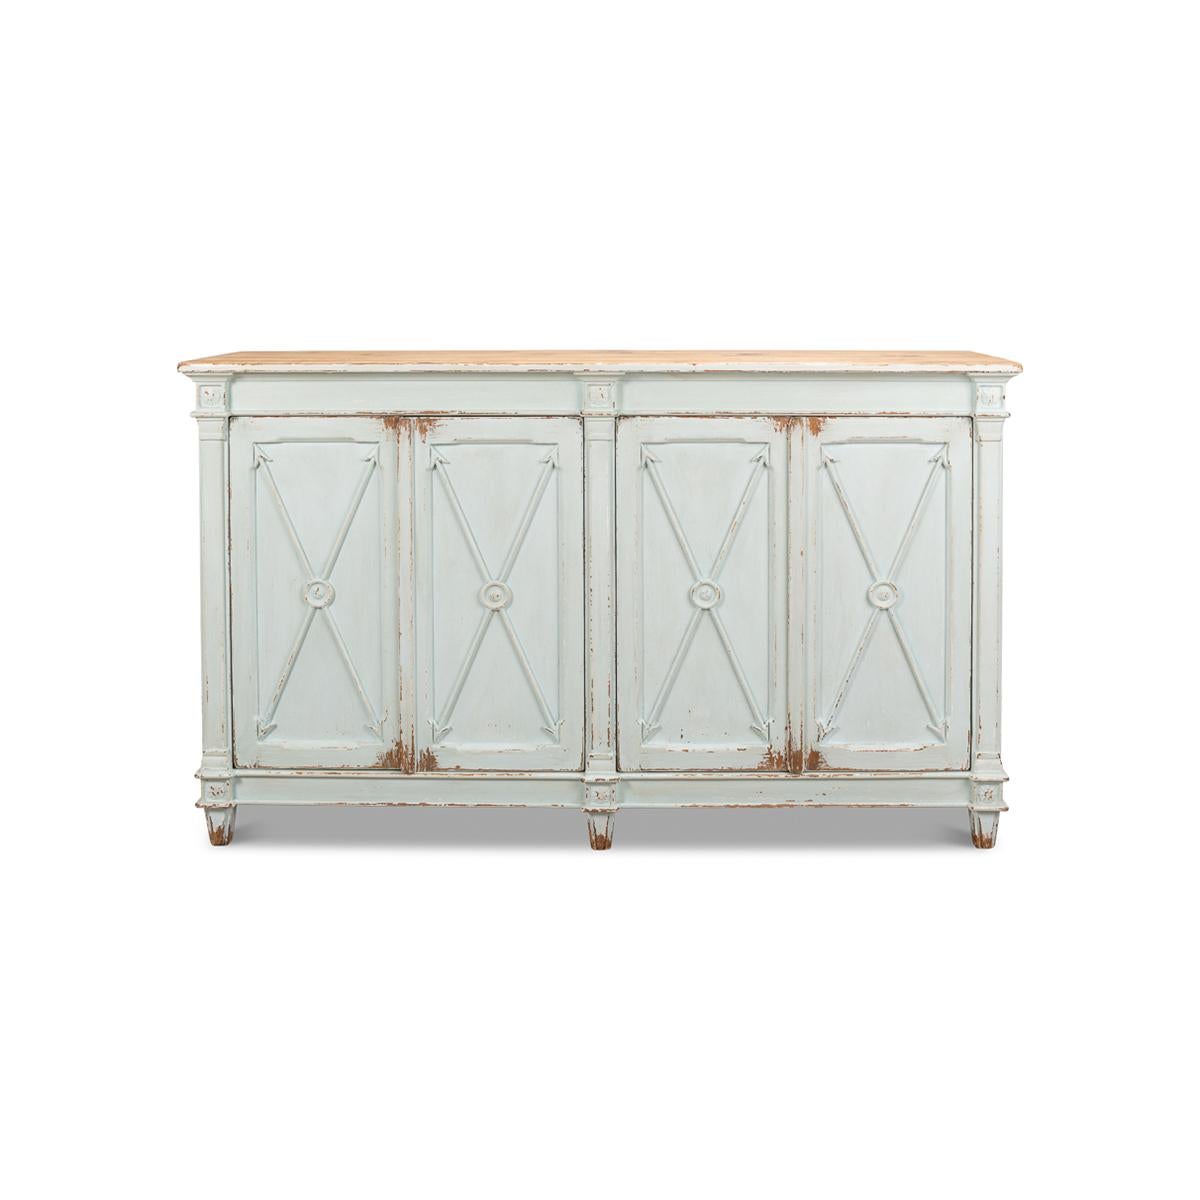 With an painted finish to the four-door cabinet and with a natural pine top. Each door has a cross arrow design. This piece is crafted in pine and has an antiqued rustic finish. The interior has two removable shelves.

Dimensions: 66